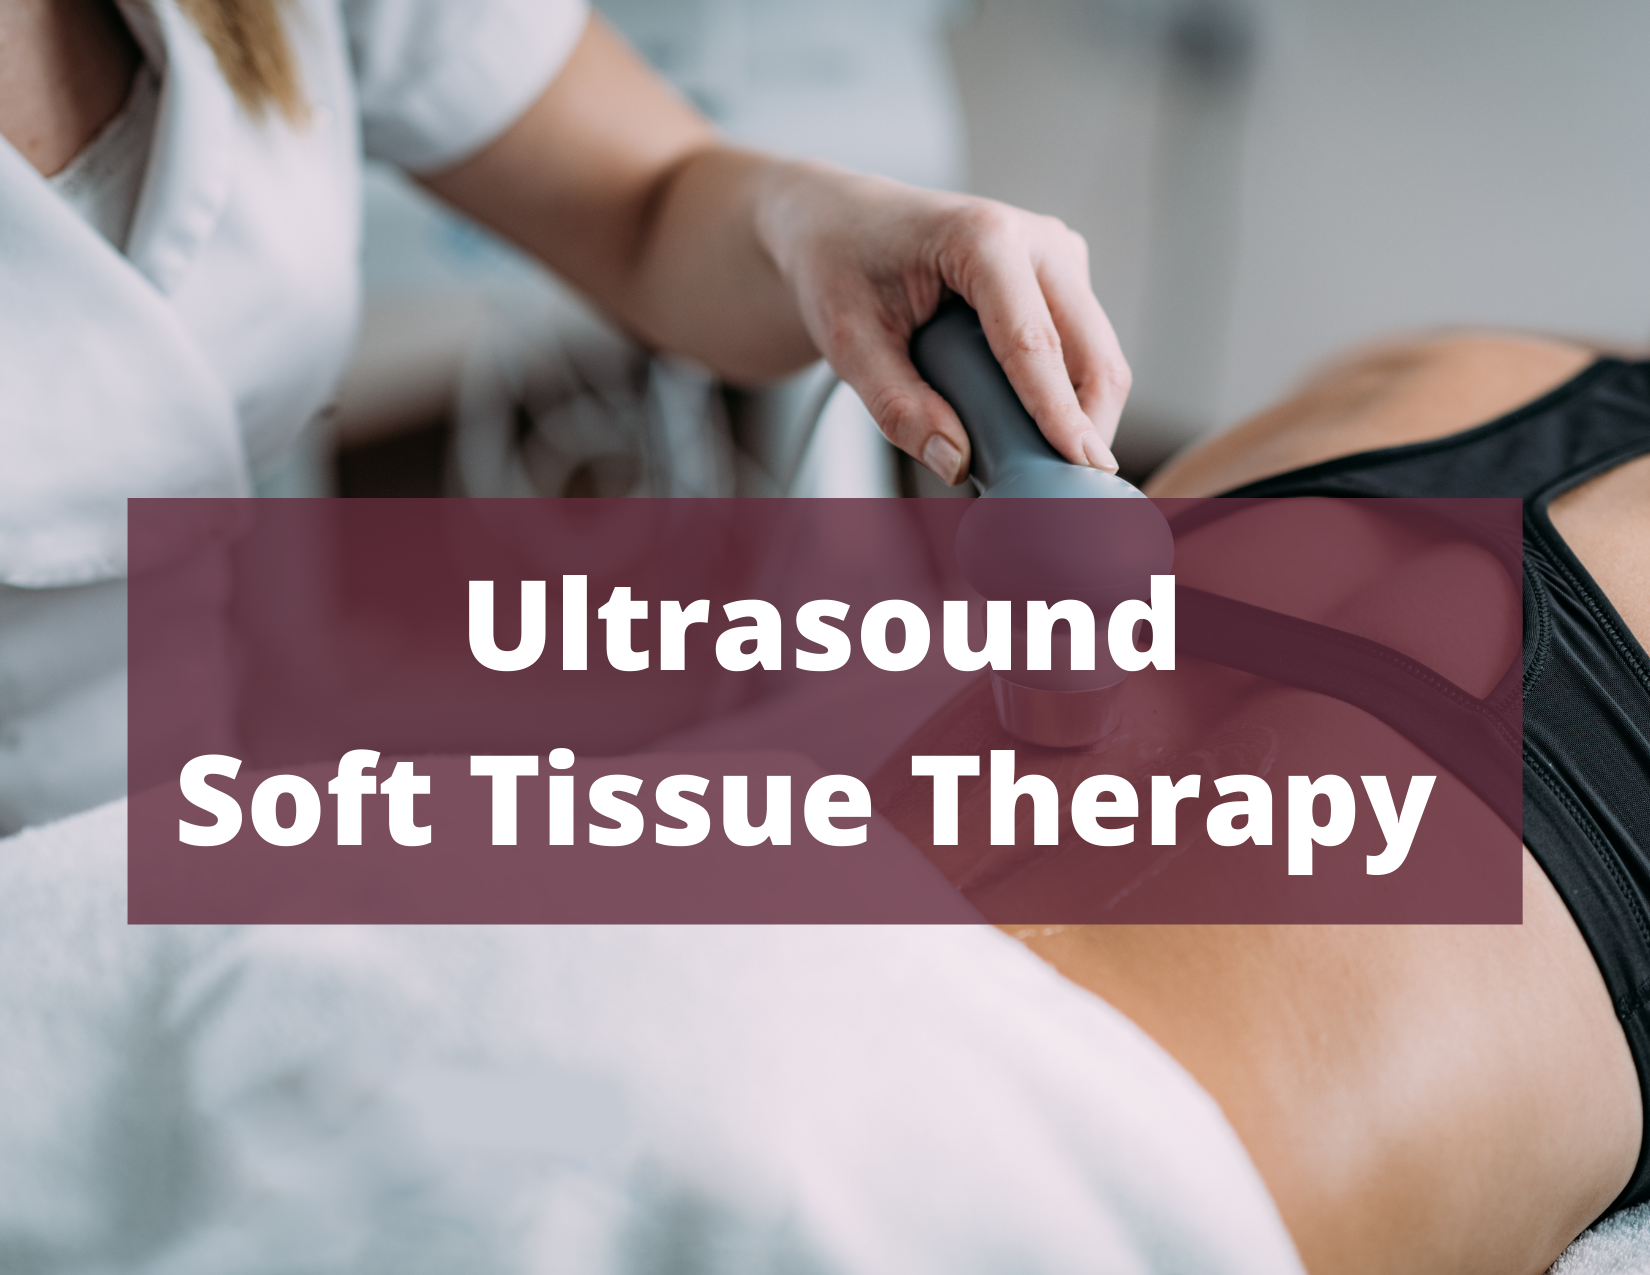 Ultrasound Soft Tissue Therapy